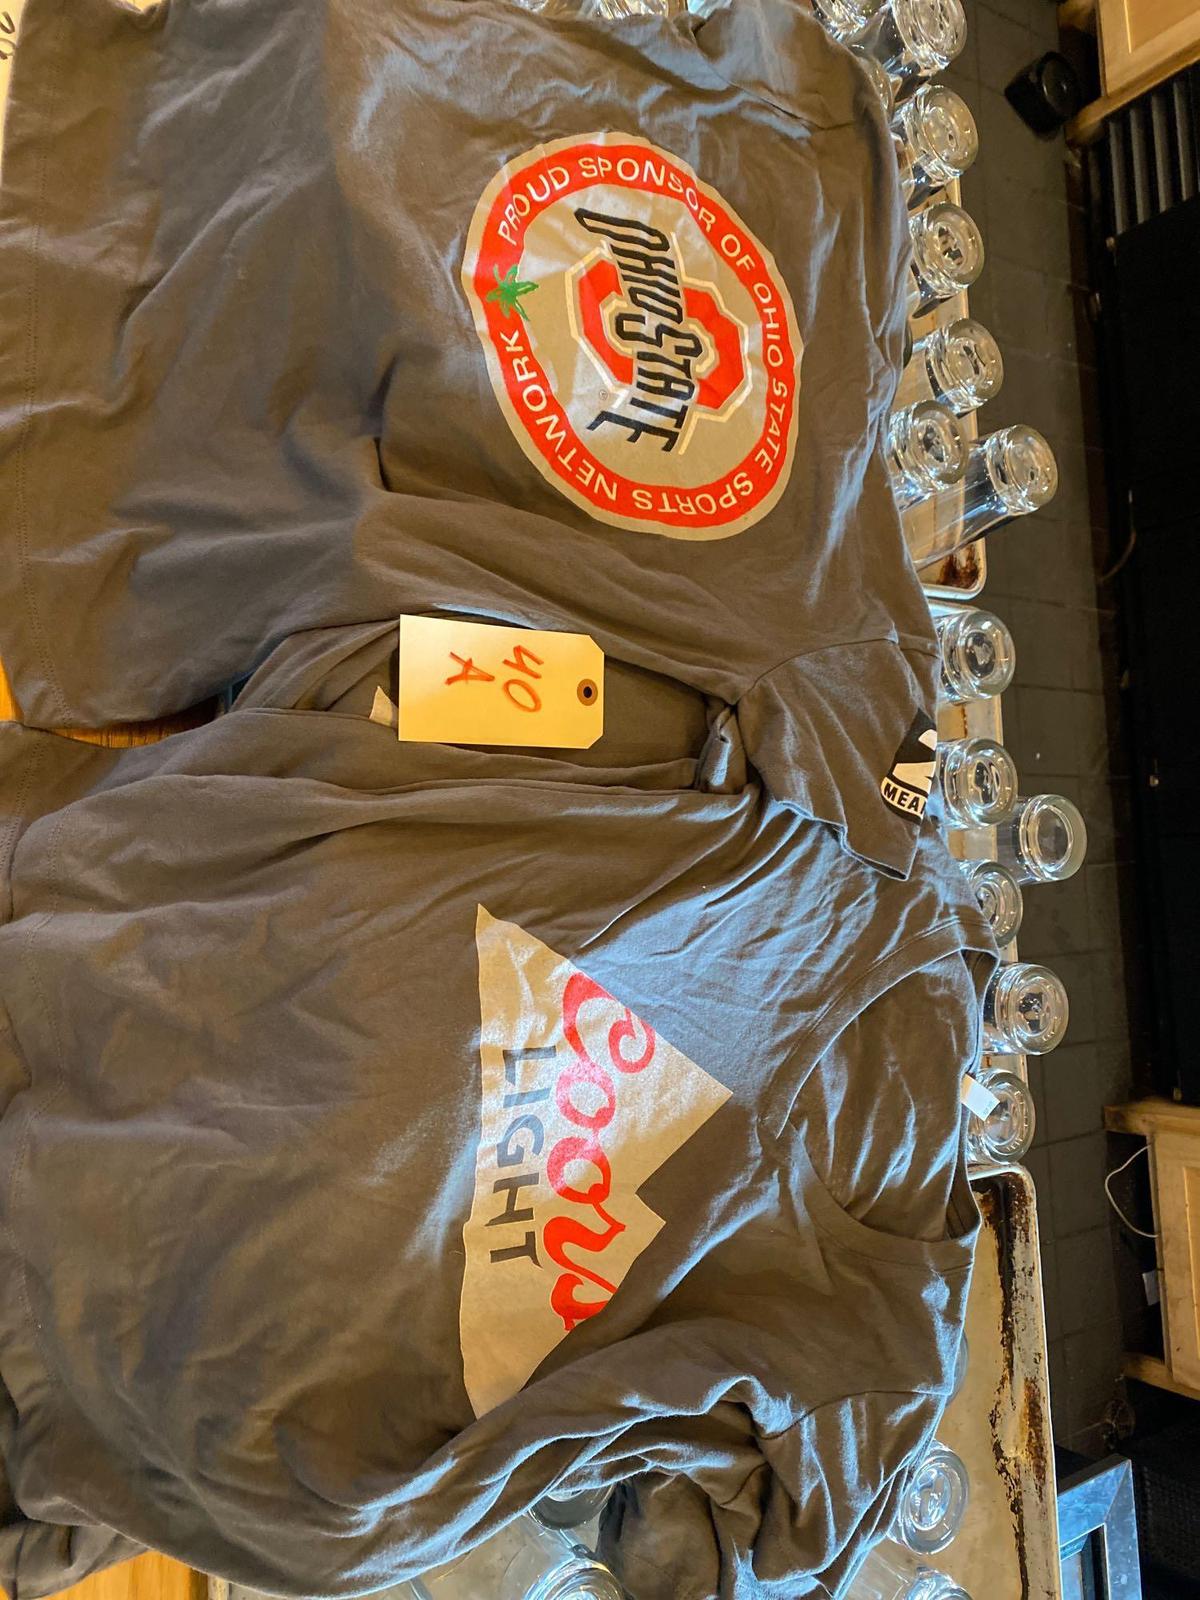 (8) New Coors Light/Ohio State V-Neck Bartender T Shirts (all small and medium)